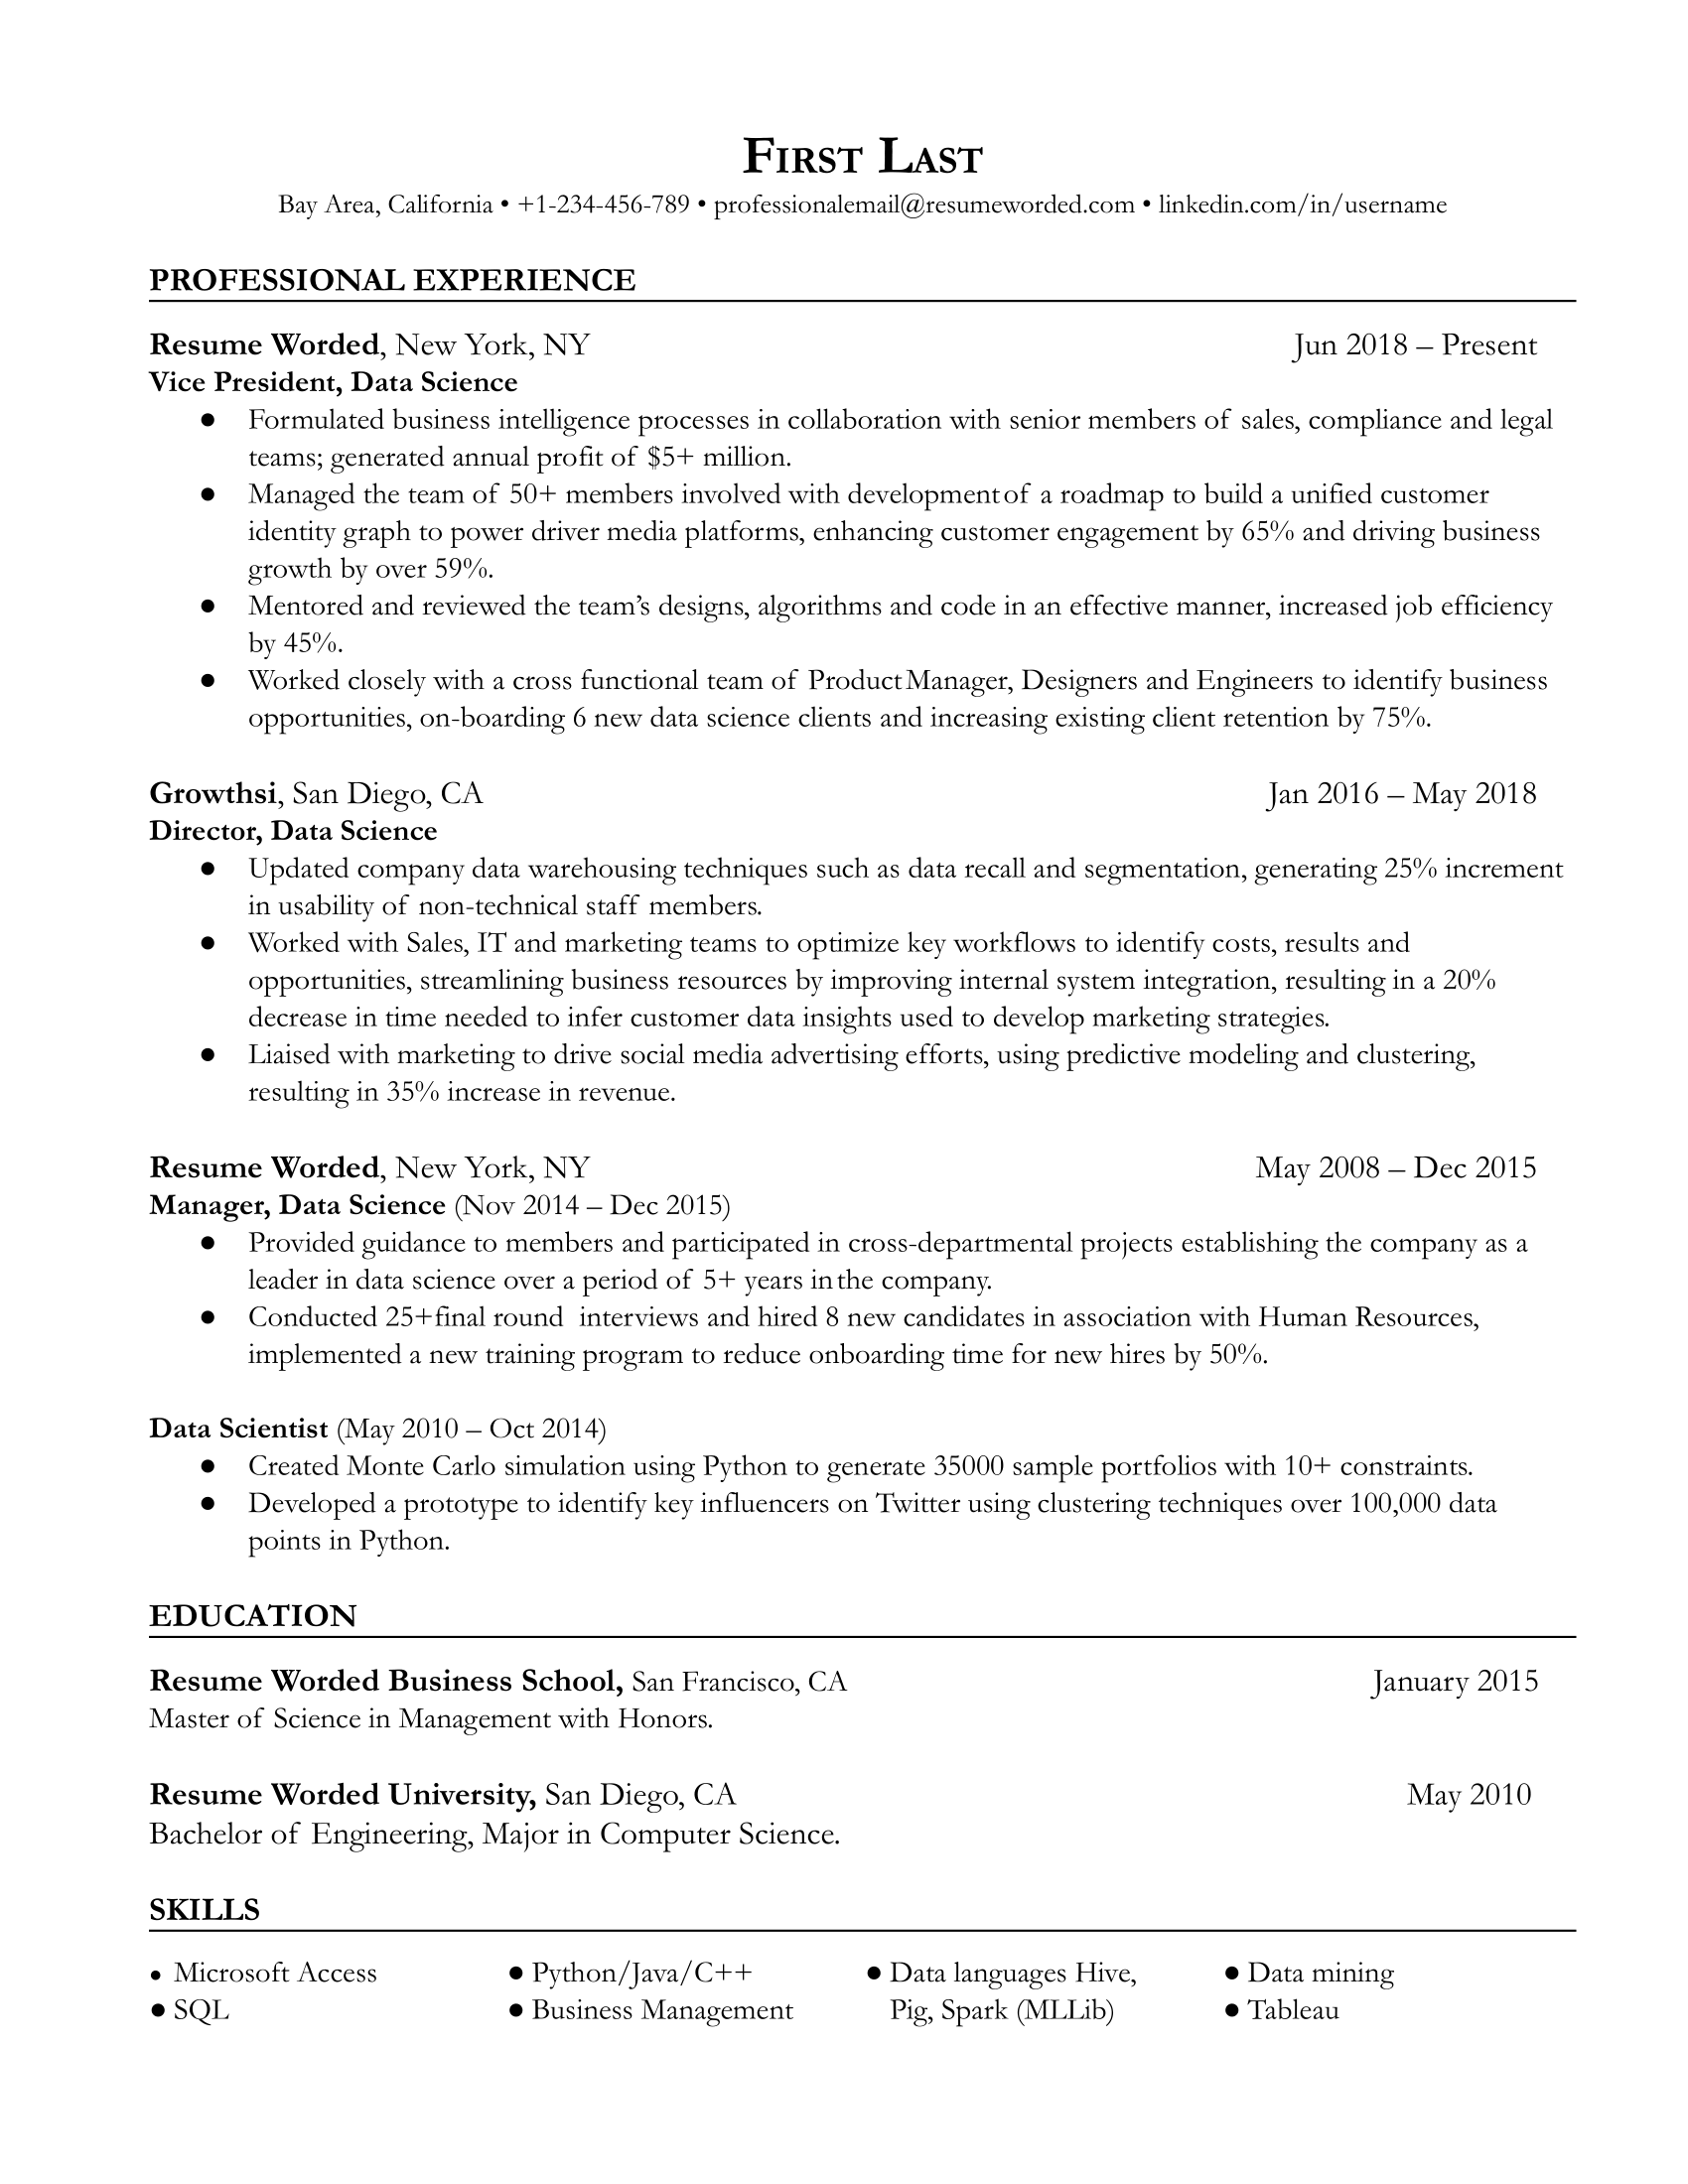 Data Science Vice President Resume Template + Example